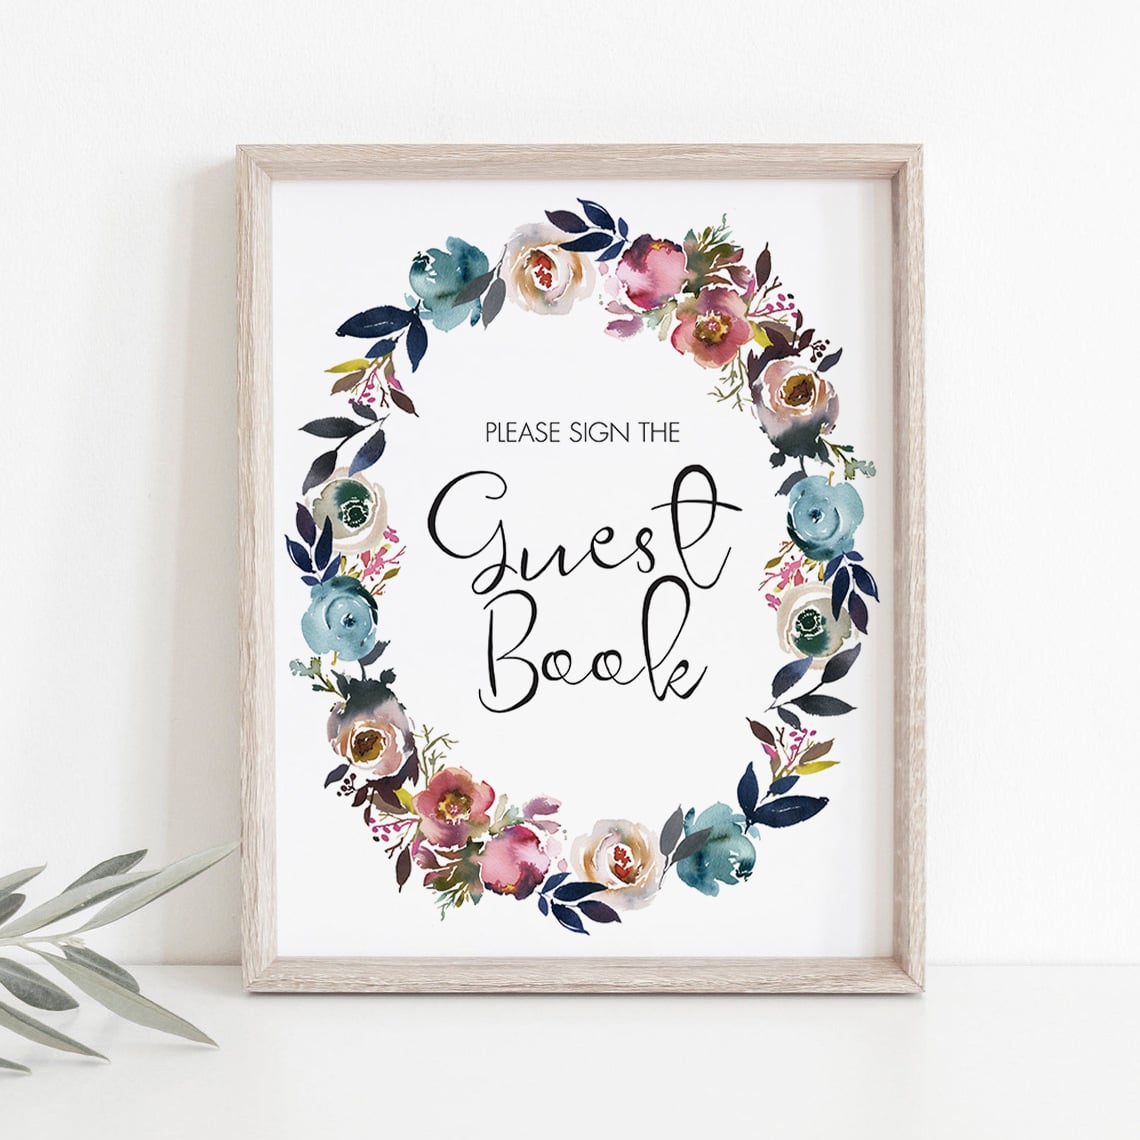 Watercolor floral guest book printable table sign by LittleSizzle